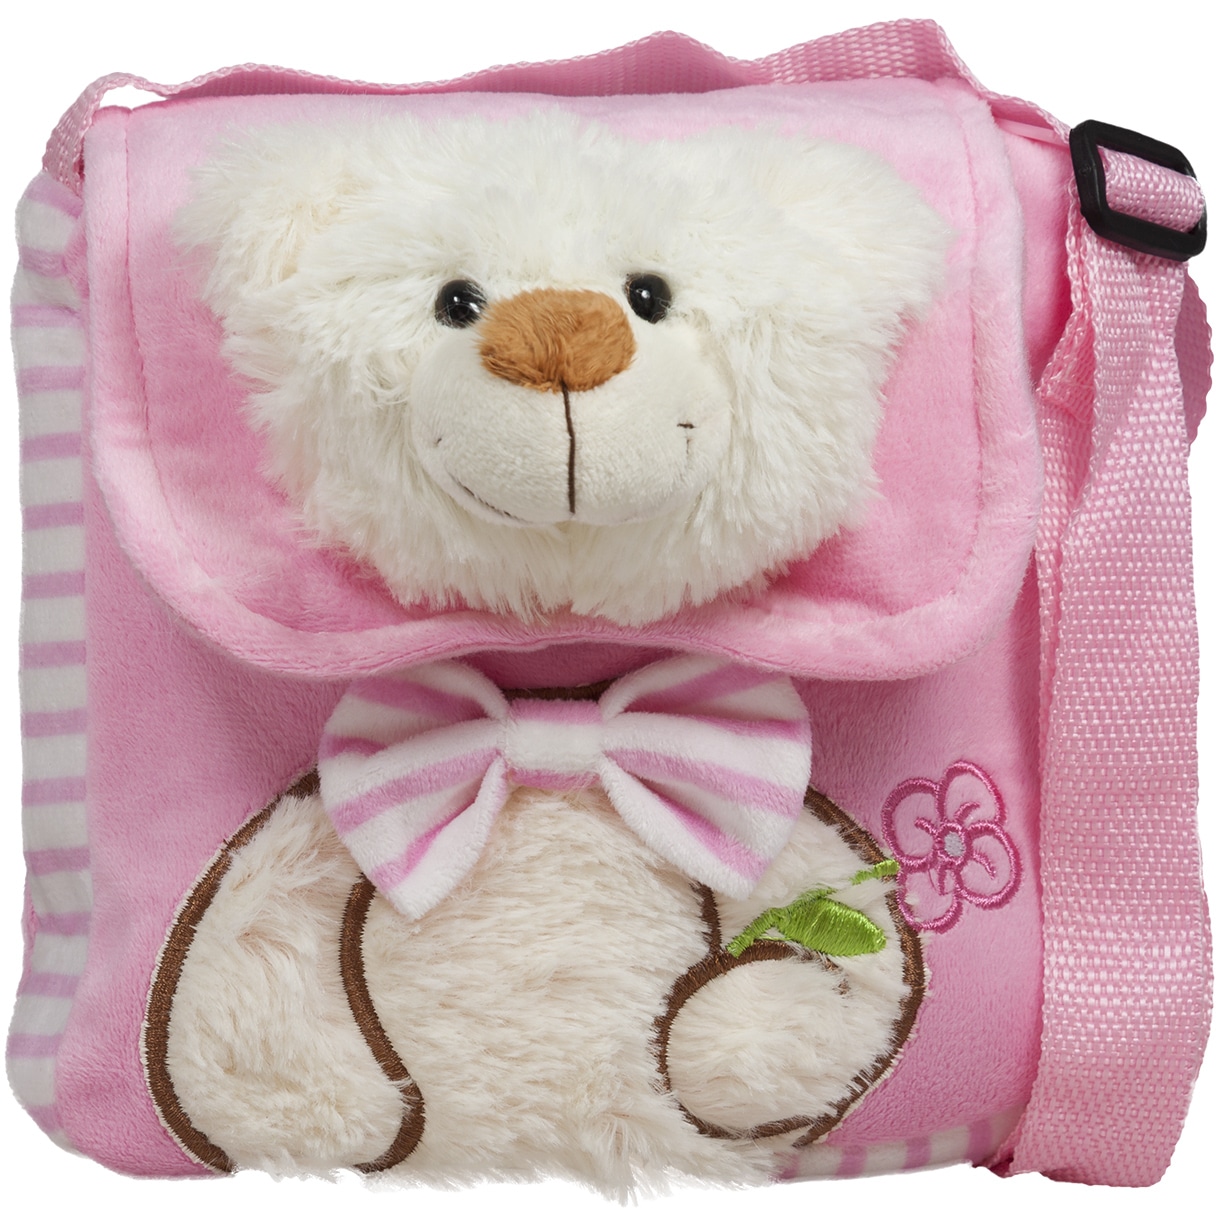 Bag with a bear - Pink